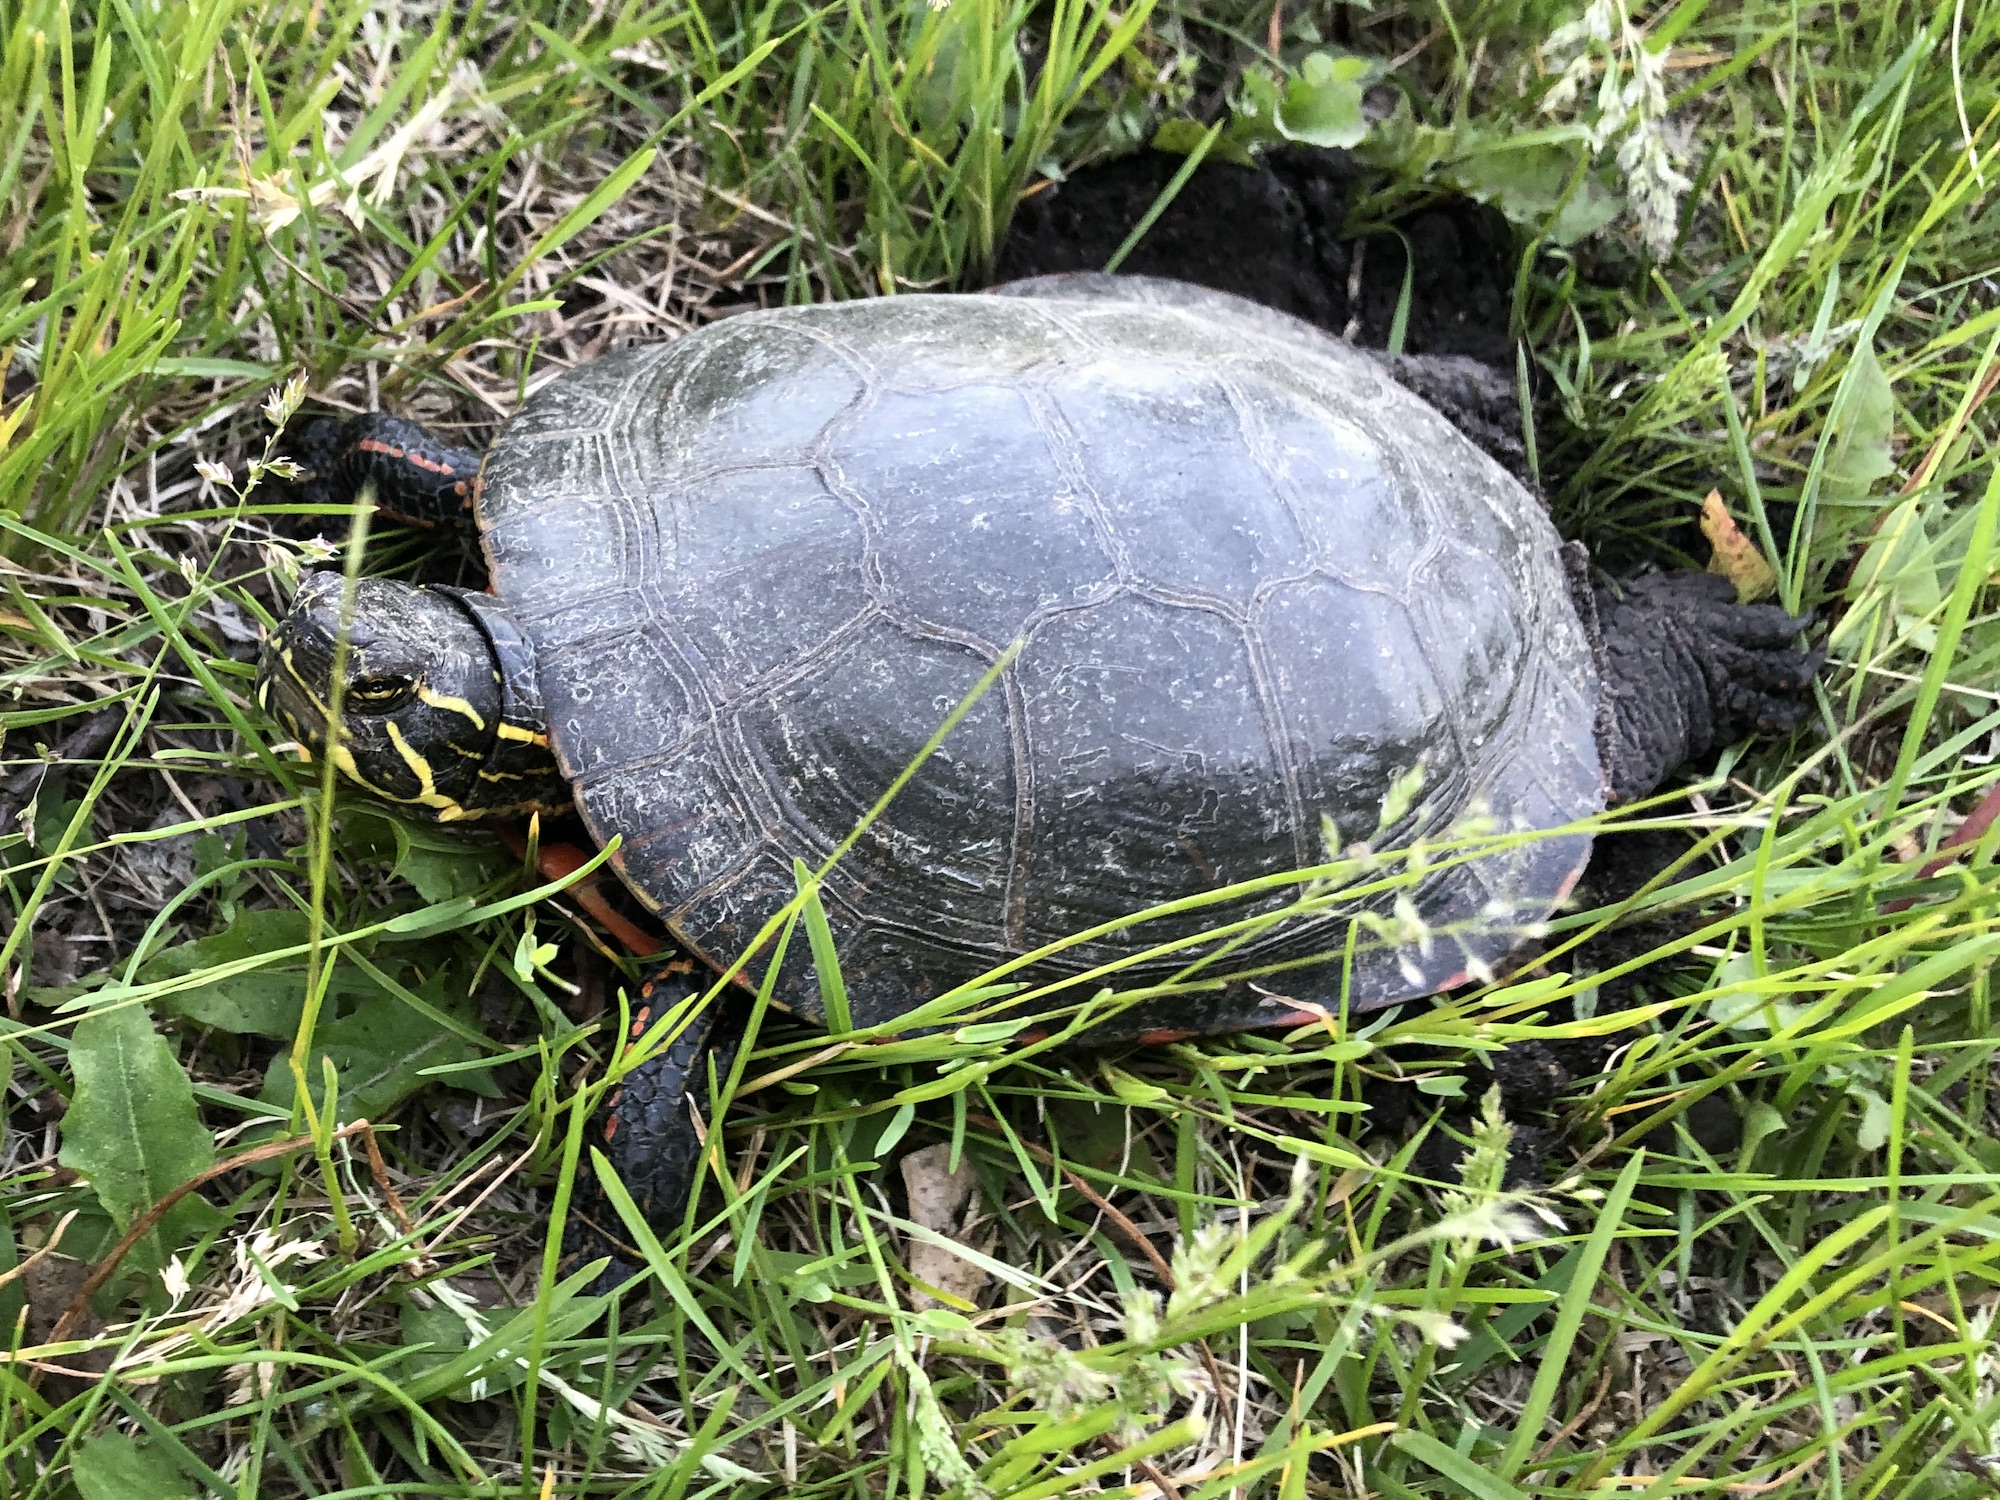 Painted Turtle laying eggs in E. Ray Stevens Aquatic Gardens in Madison, Wisconsin on June 3, 2022.